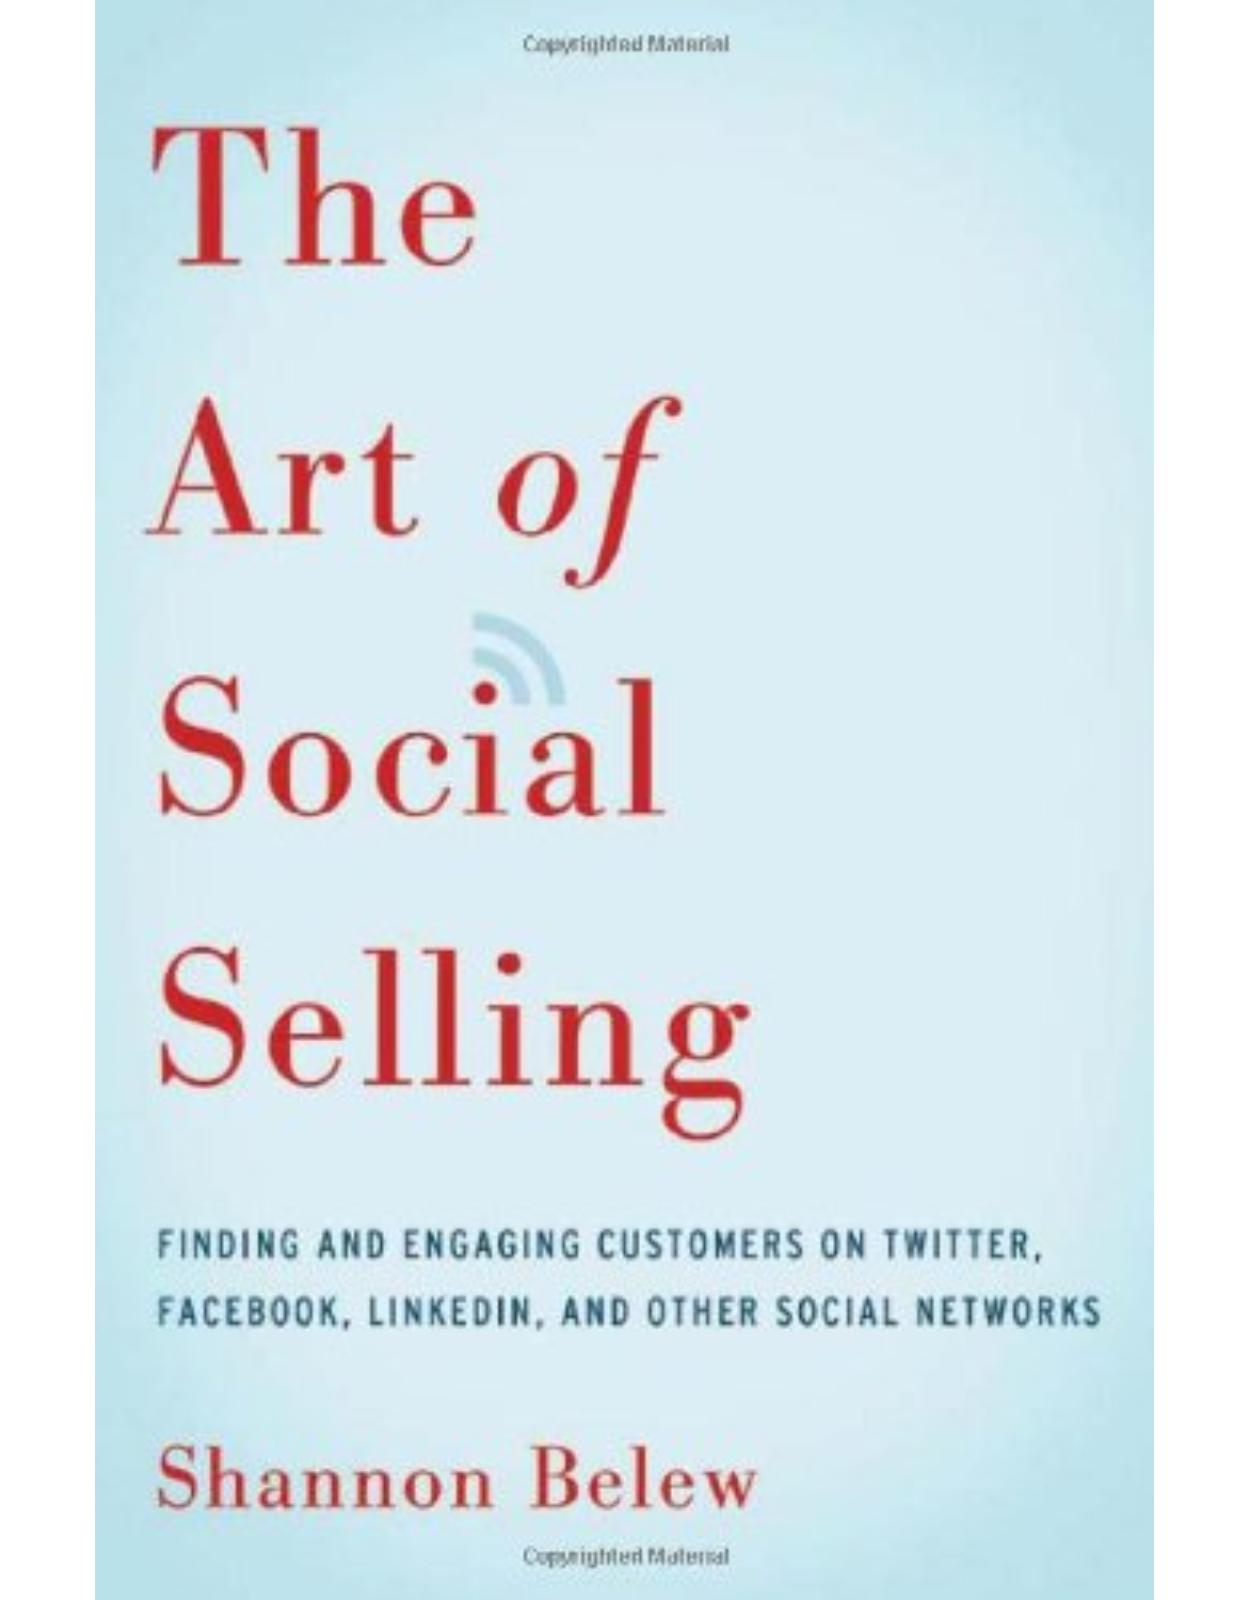 The Art of Social Selling: Finding and Engaging Customers on Twitter, Facebook, LinkedIn